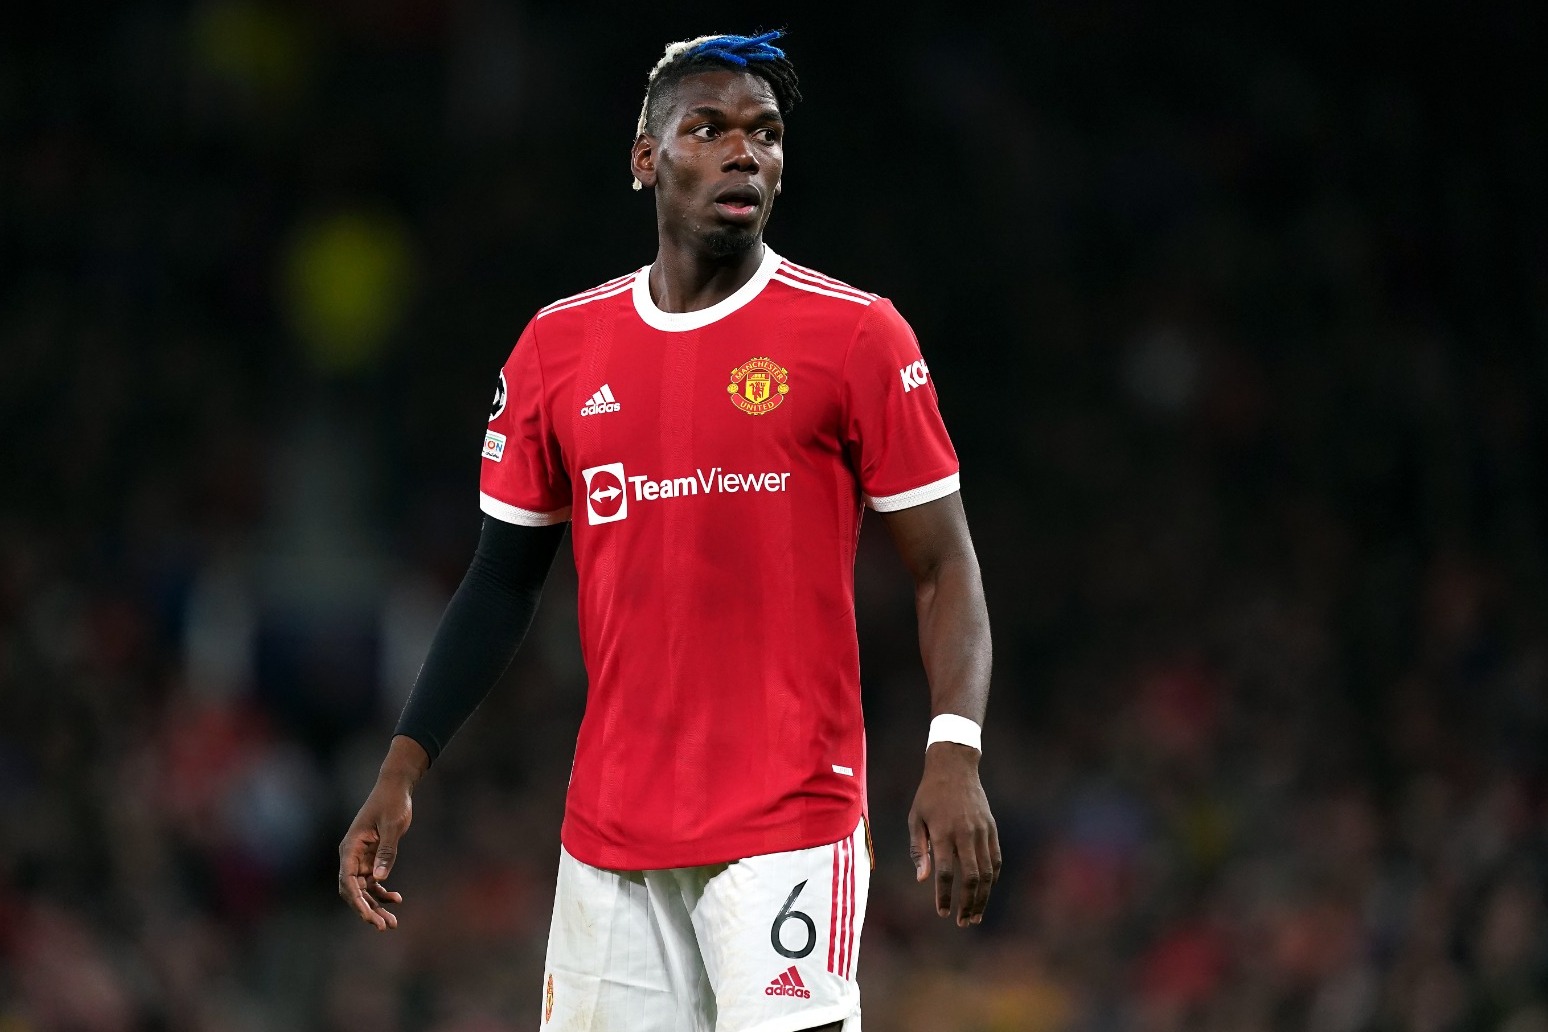 Paul Pogba out to show Man Utd ‘made a mistake’ with ‘nothing’ contract offer 